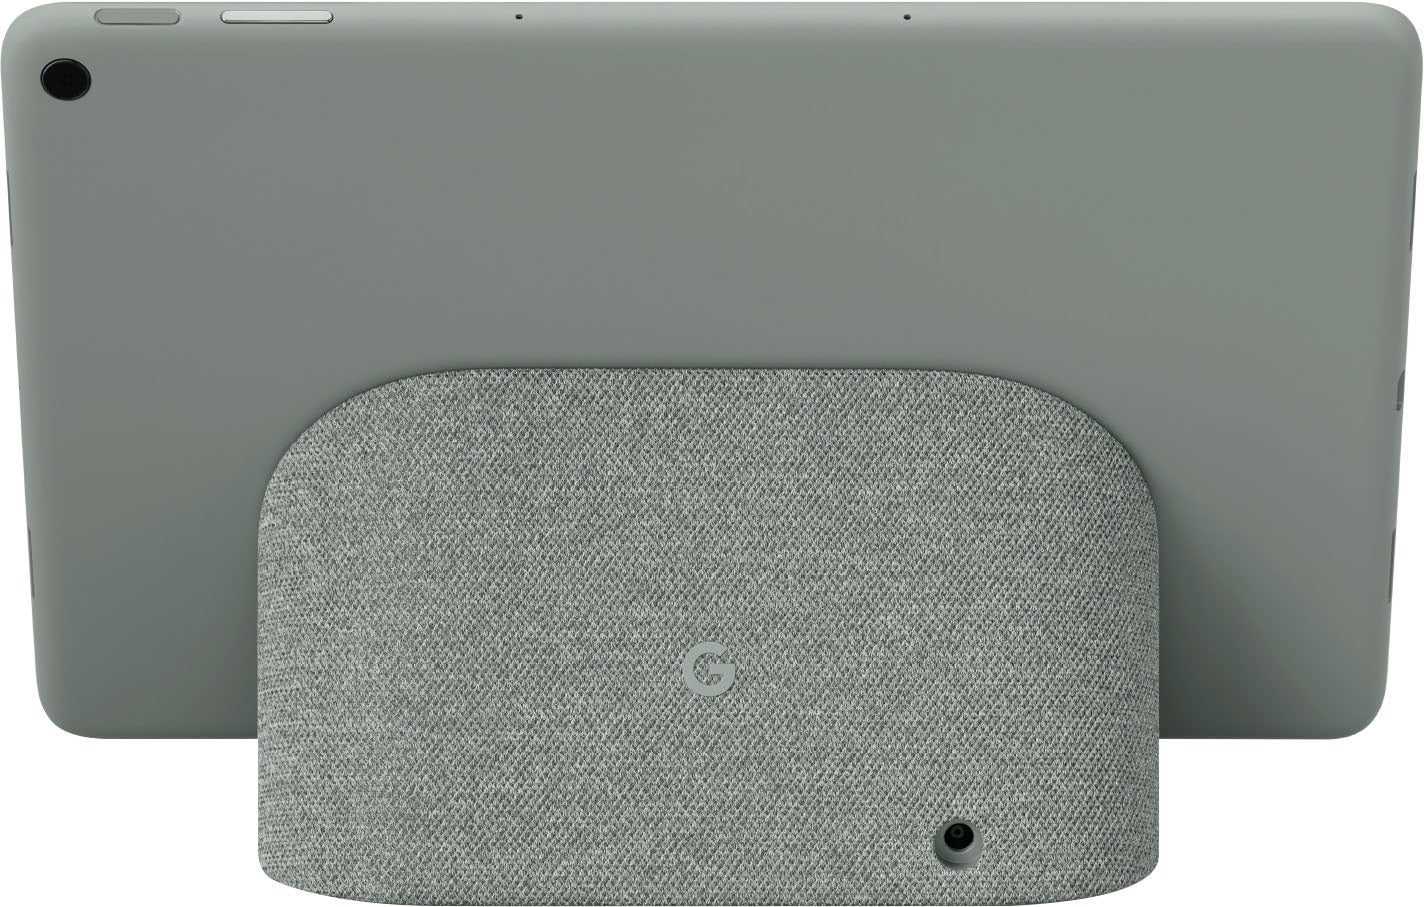 Google - Pixel Tablet with Charging Speaker Dock - 11"  Android Tablet - 256GB - Wi-Fi | BBSS15